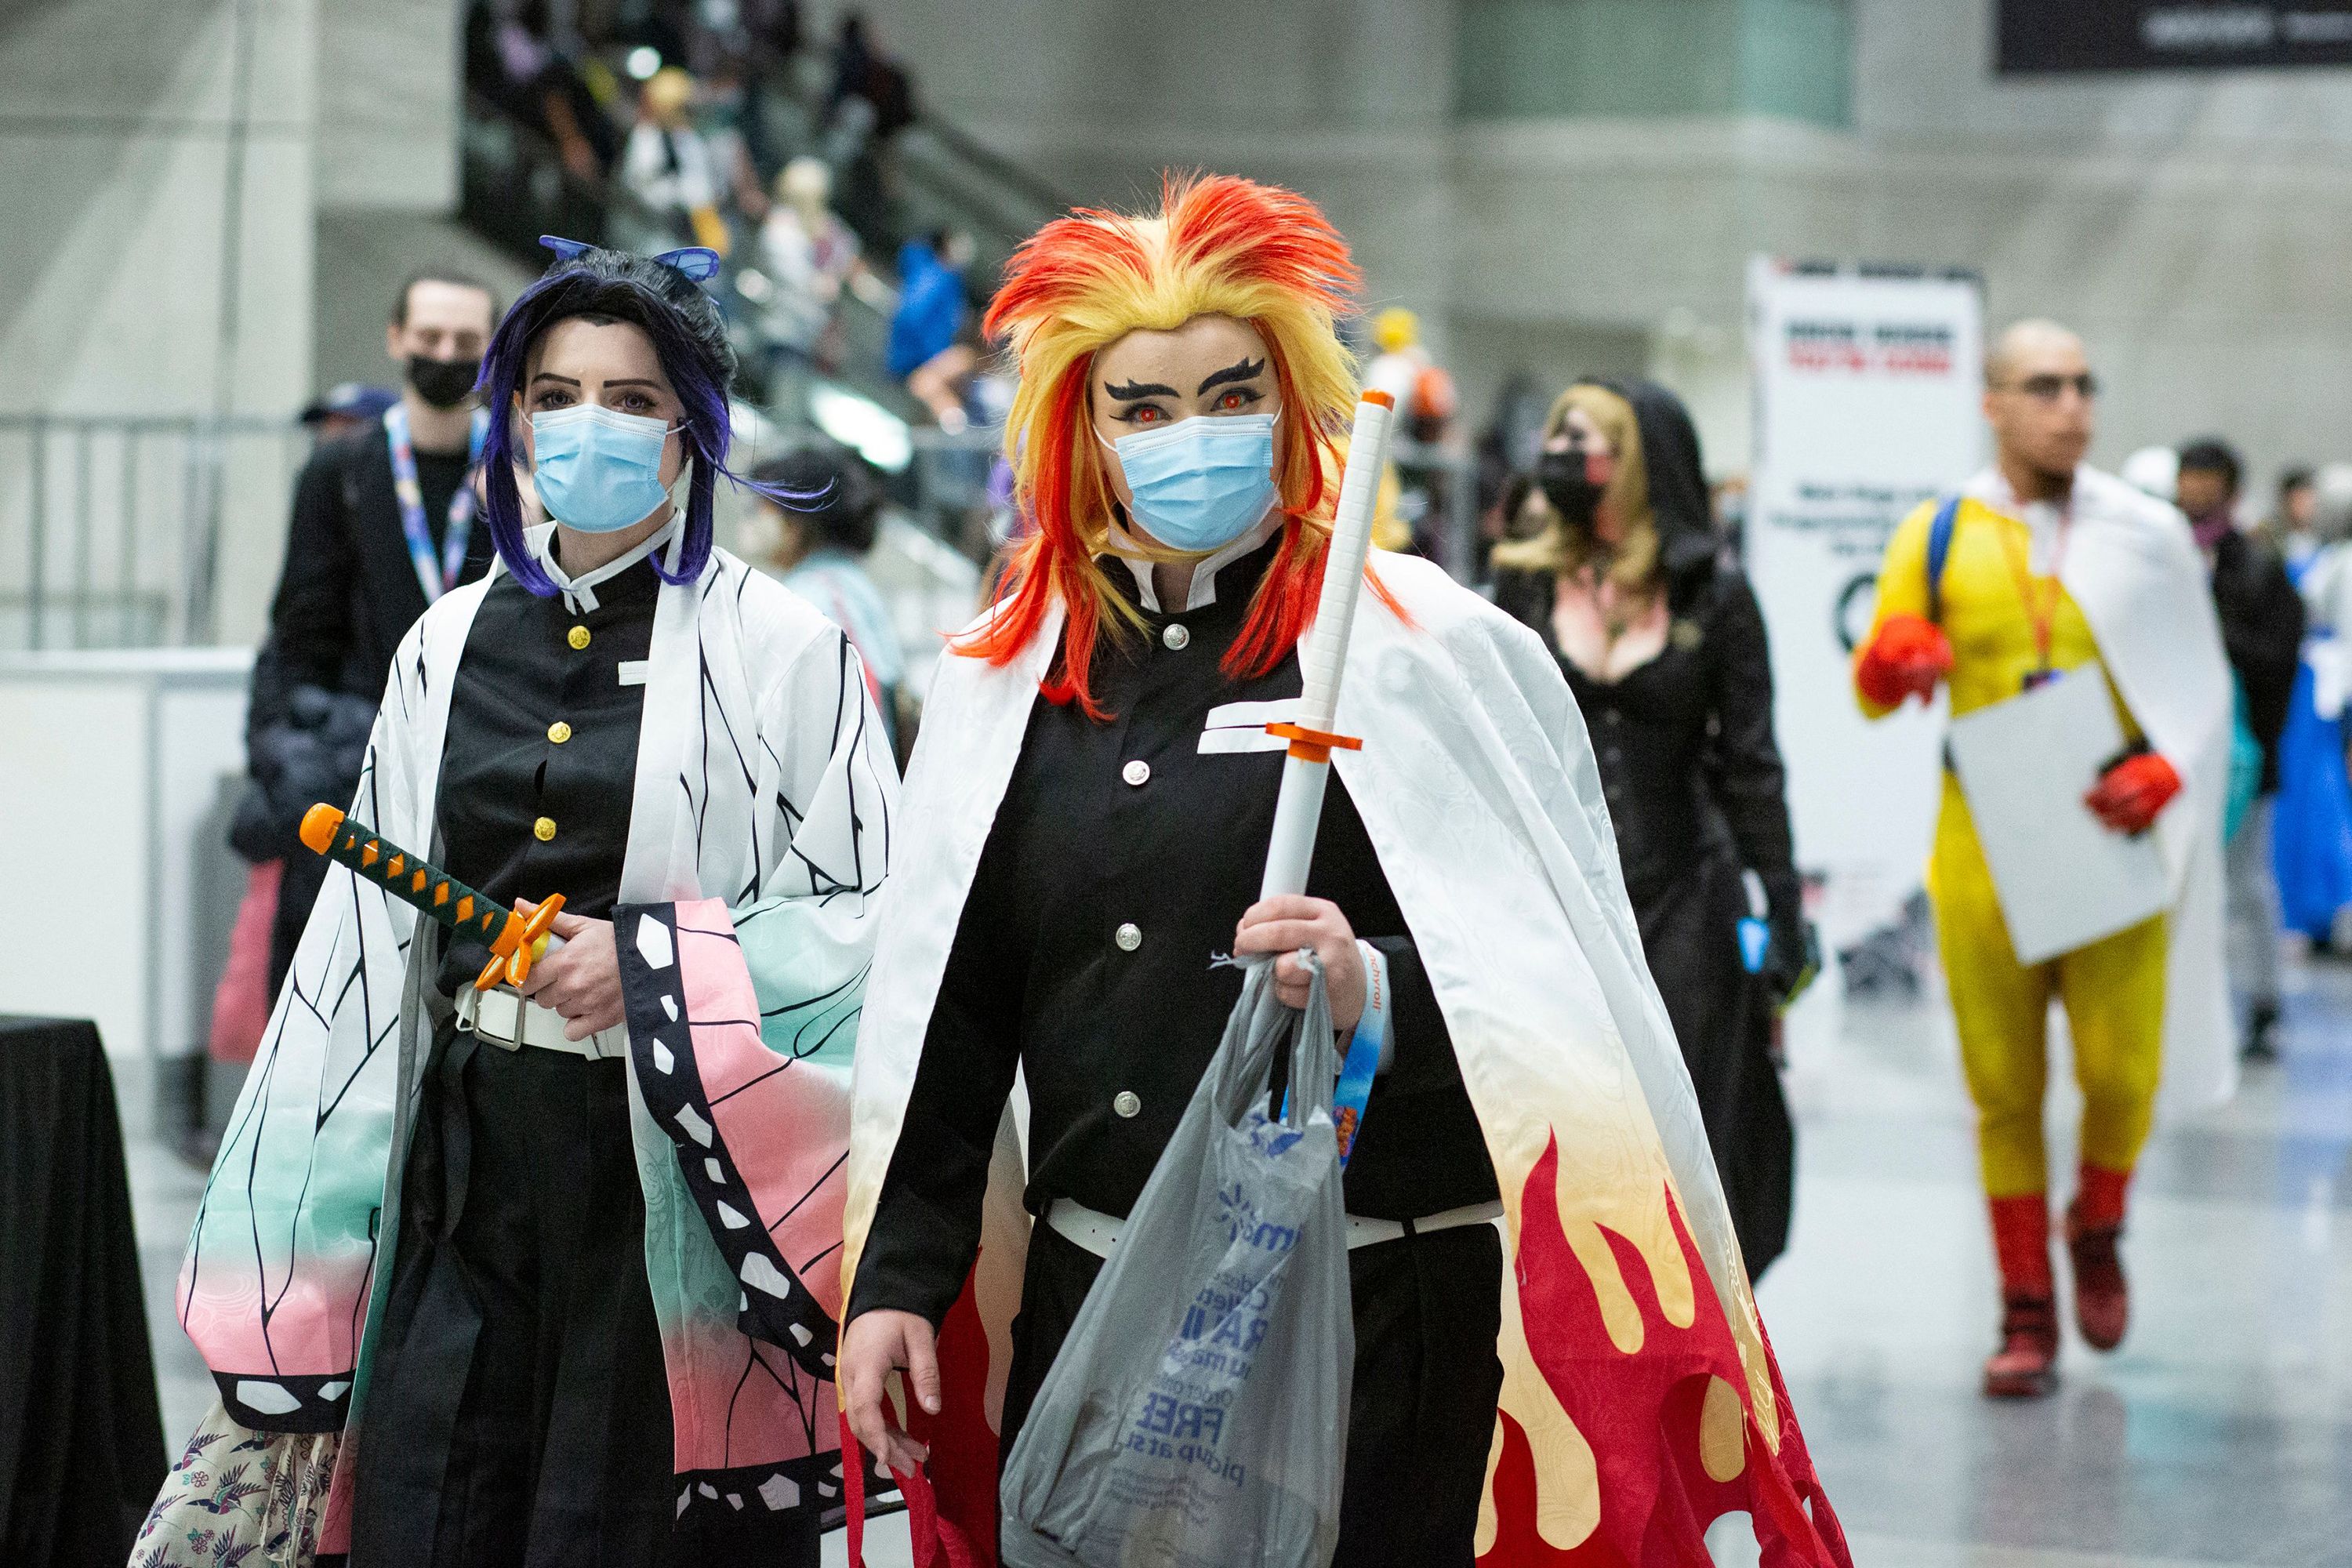 NYC anime convention may offer 'earliest looks' at Omicron spread in US,  CDC director says | CNN